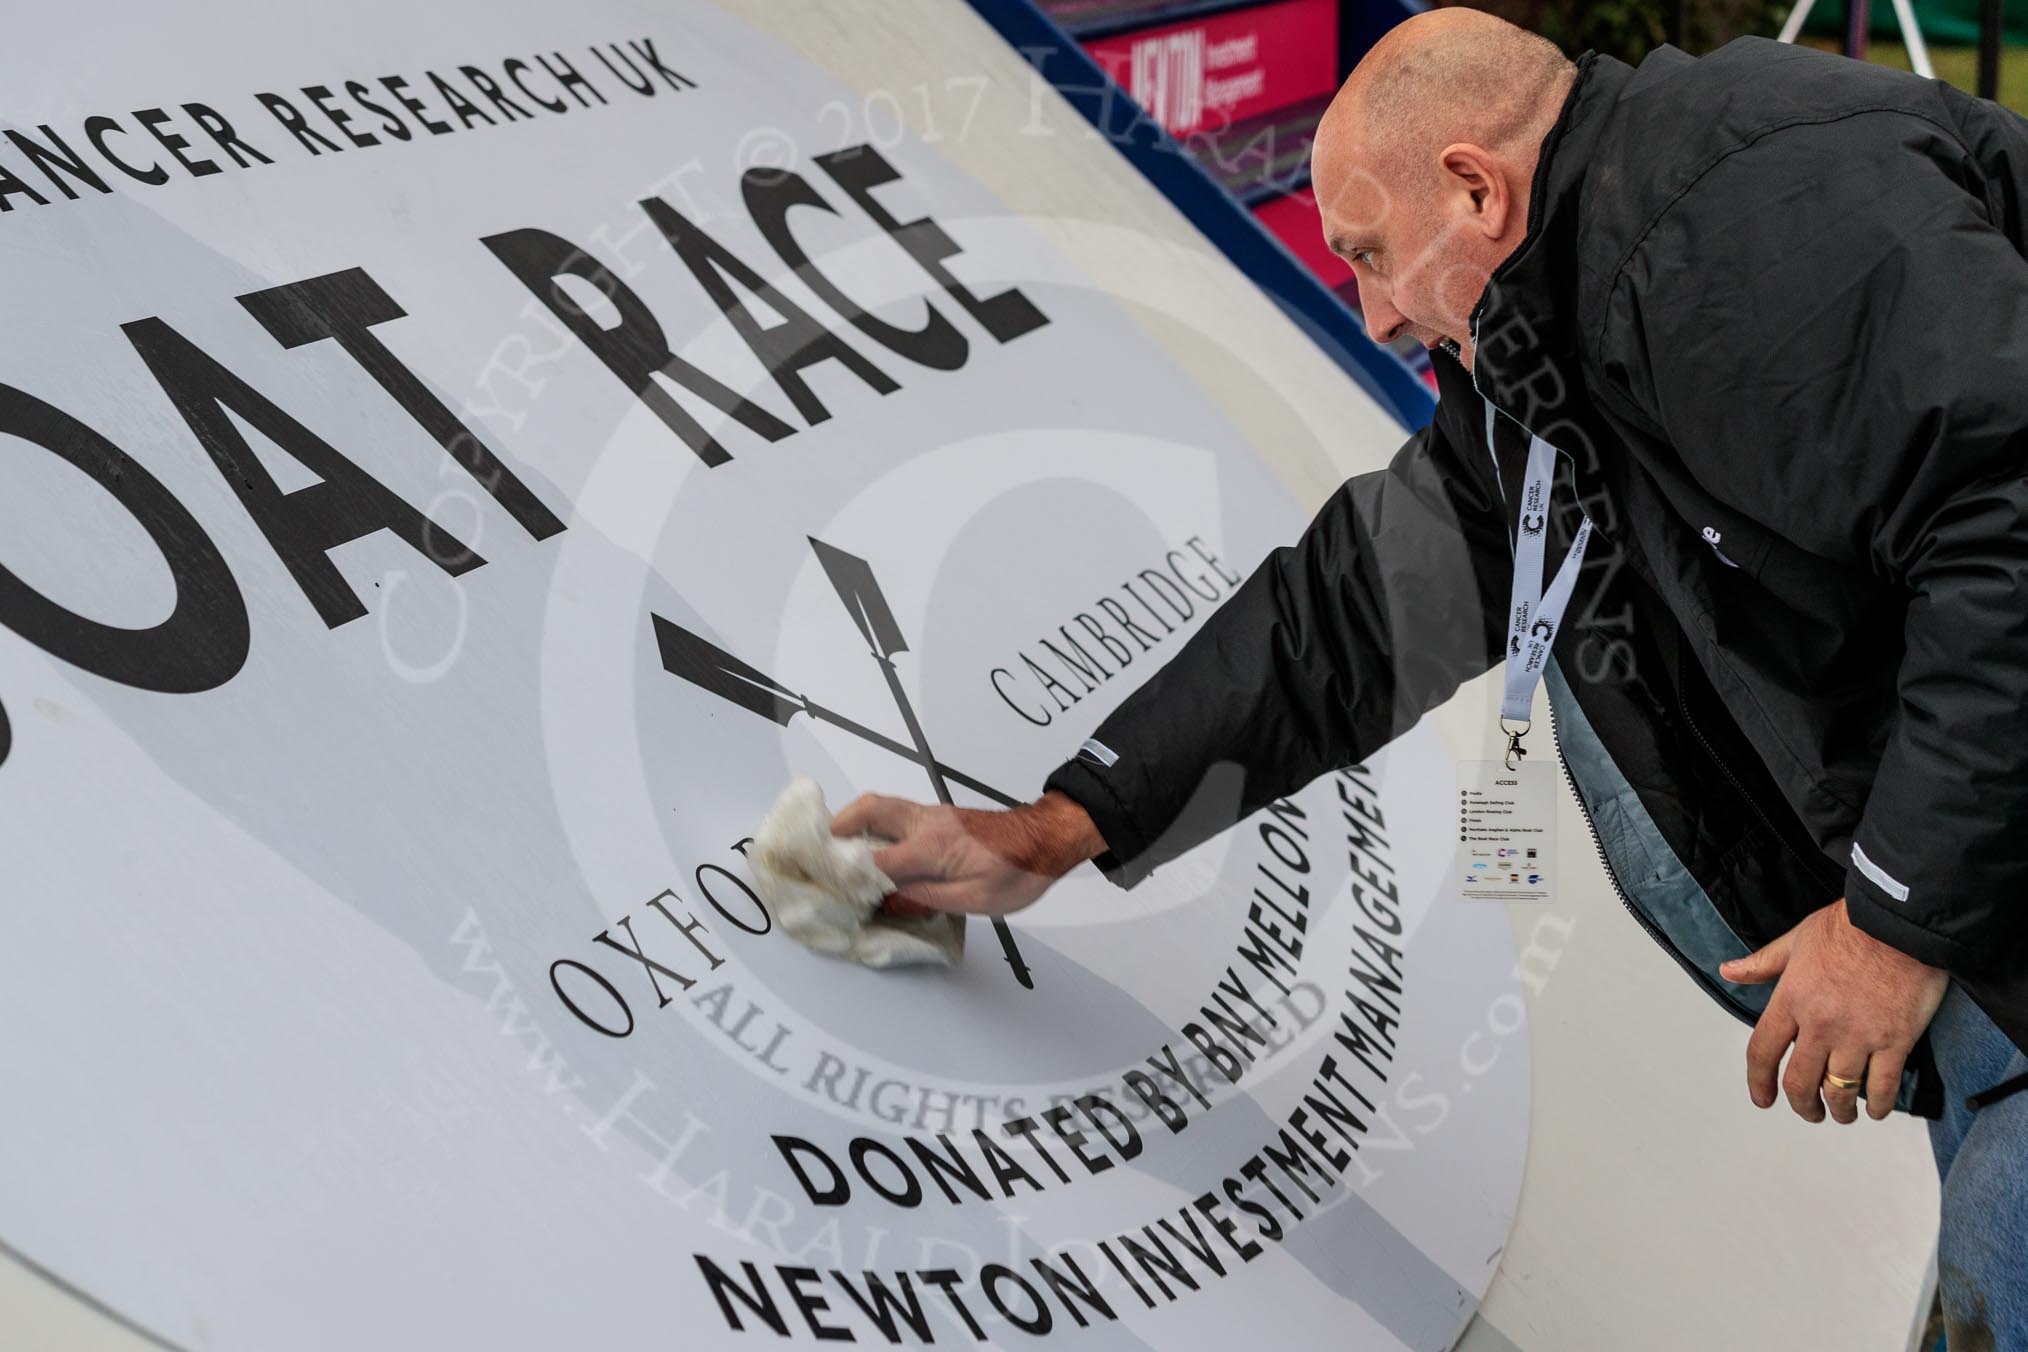 The Cancer Research UK Women's Boat Race 2018: Cleaning up after the Women's Boat Race, there will be more champagne all over the place after the men's race.
River Thames between Putney Bridge and Mortlake,
London SW15,

United Kingdom,
on 24 March 2018 at 17:13, image #313